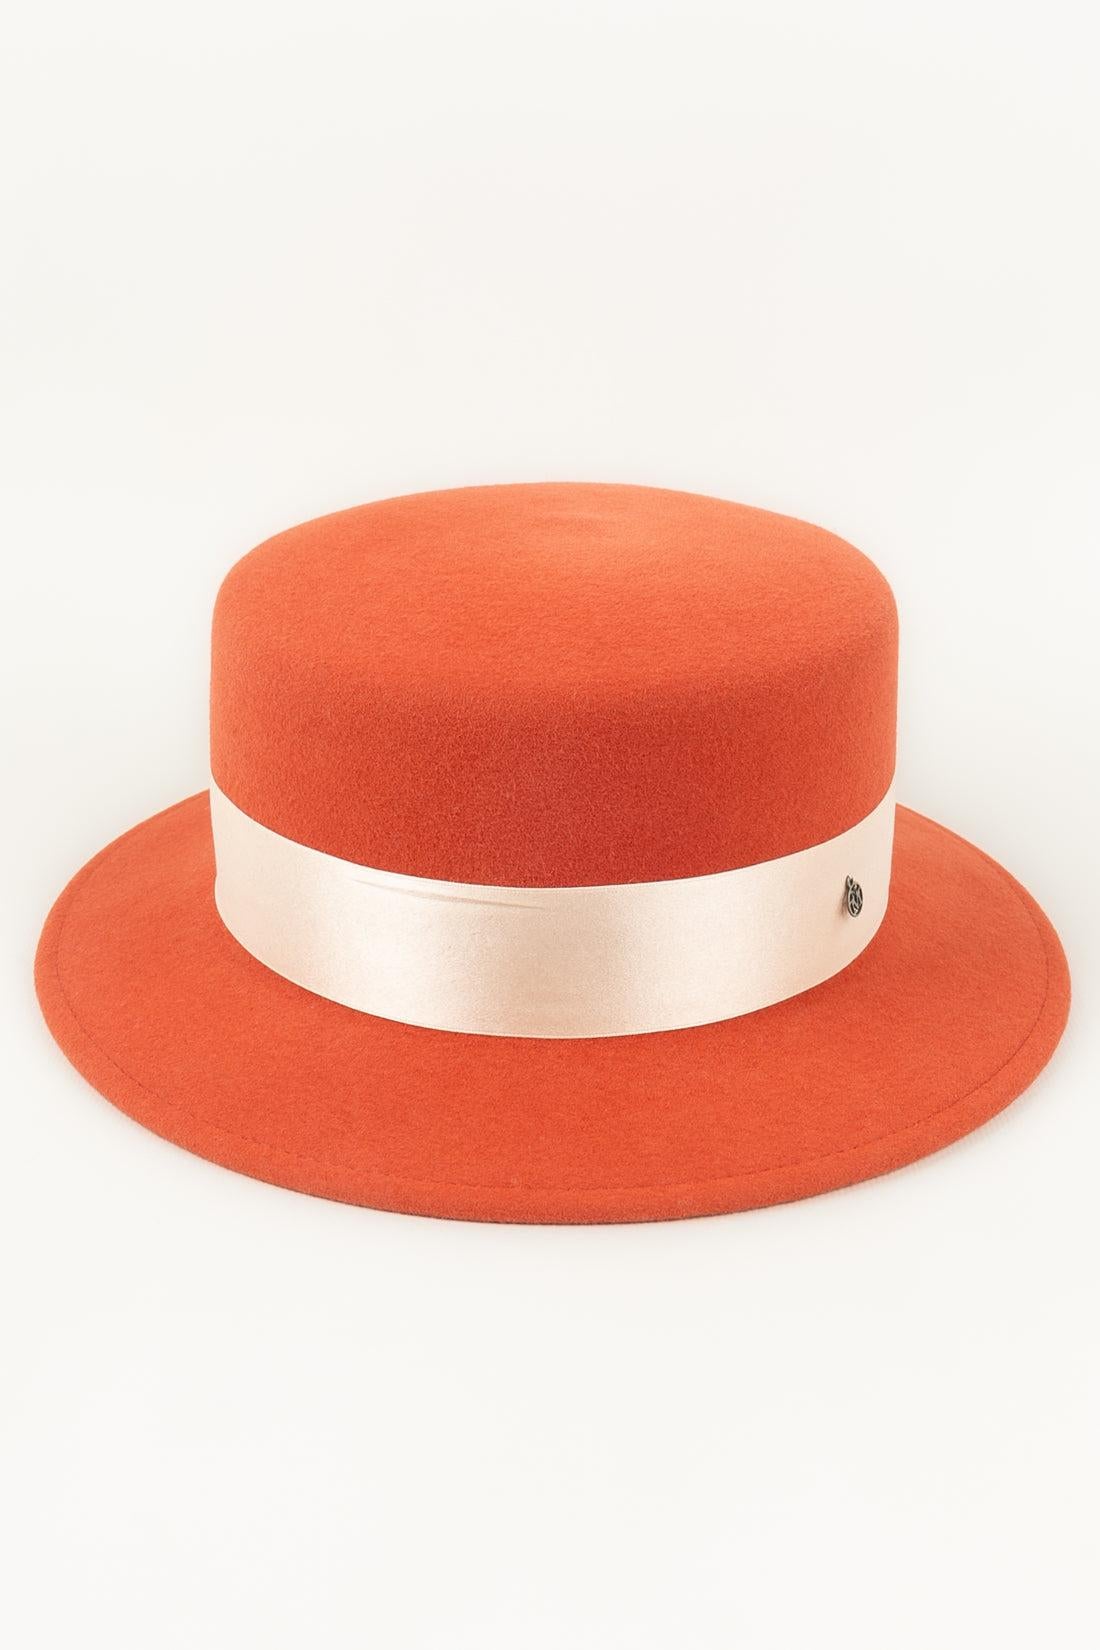 Maison Michel - Felt hat in orange / brick colors.

Additional information: 
Dimensions: Size M
Condition: Very good condition
Seller Ref number: CHP79